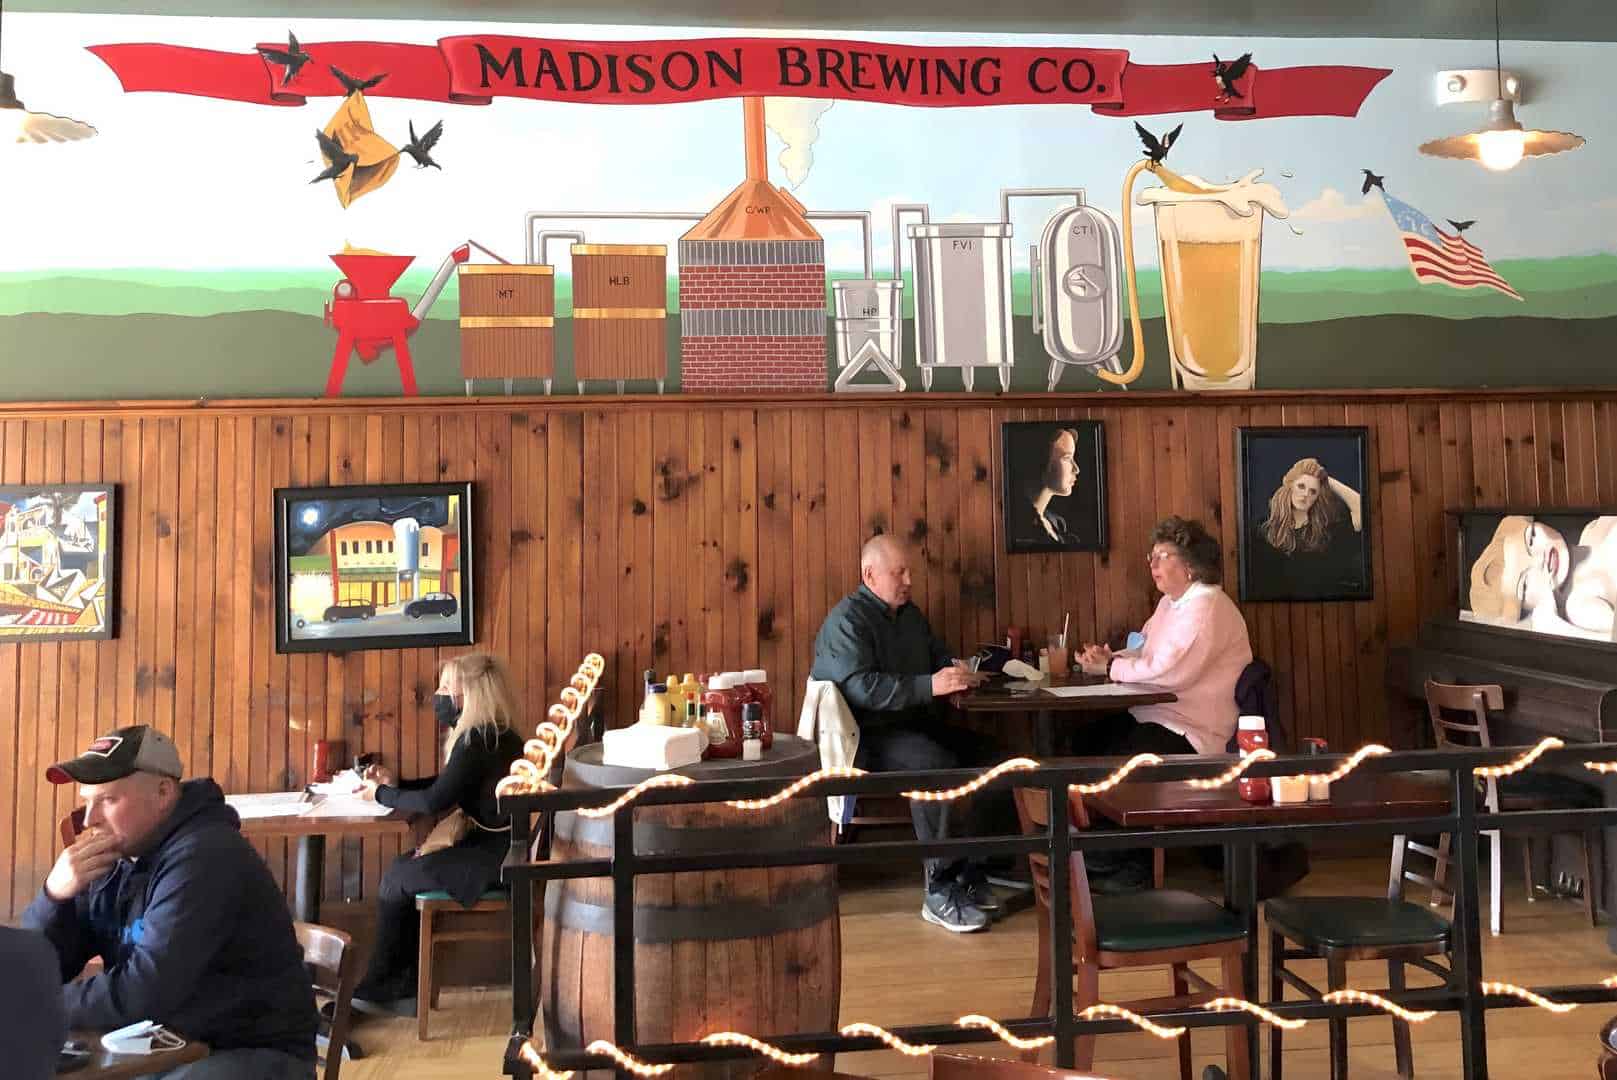 Madison Brewing Co. Brew Pub and Restaurant